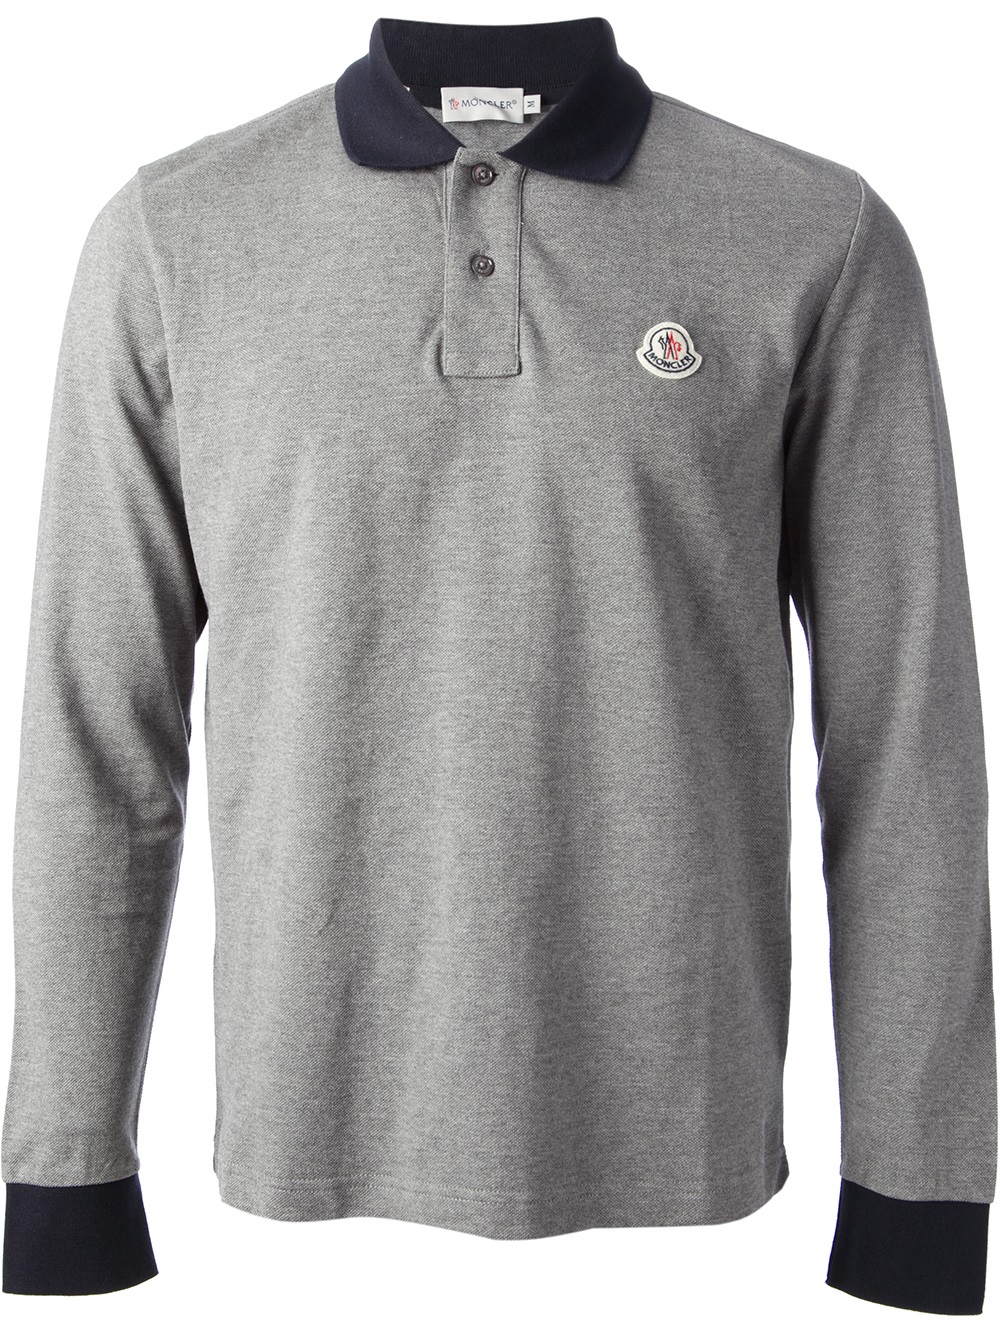 Lyst - Moncler Long Sleeve Polo Shirt in Gray for Men